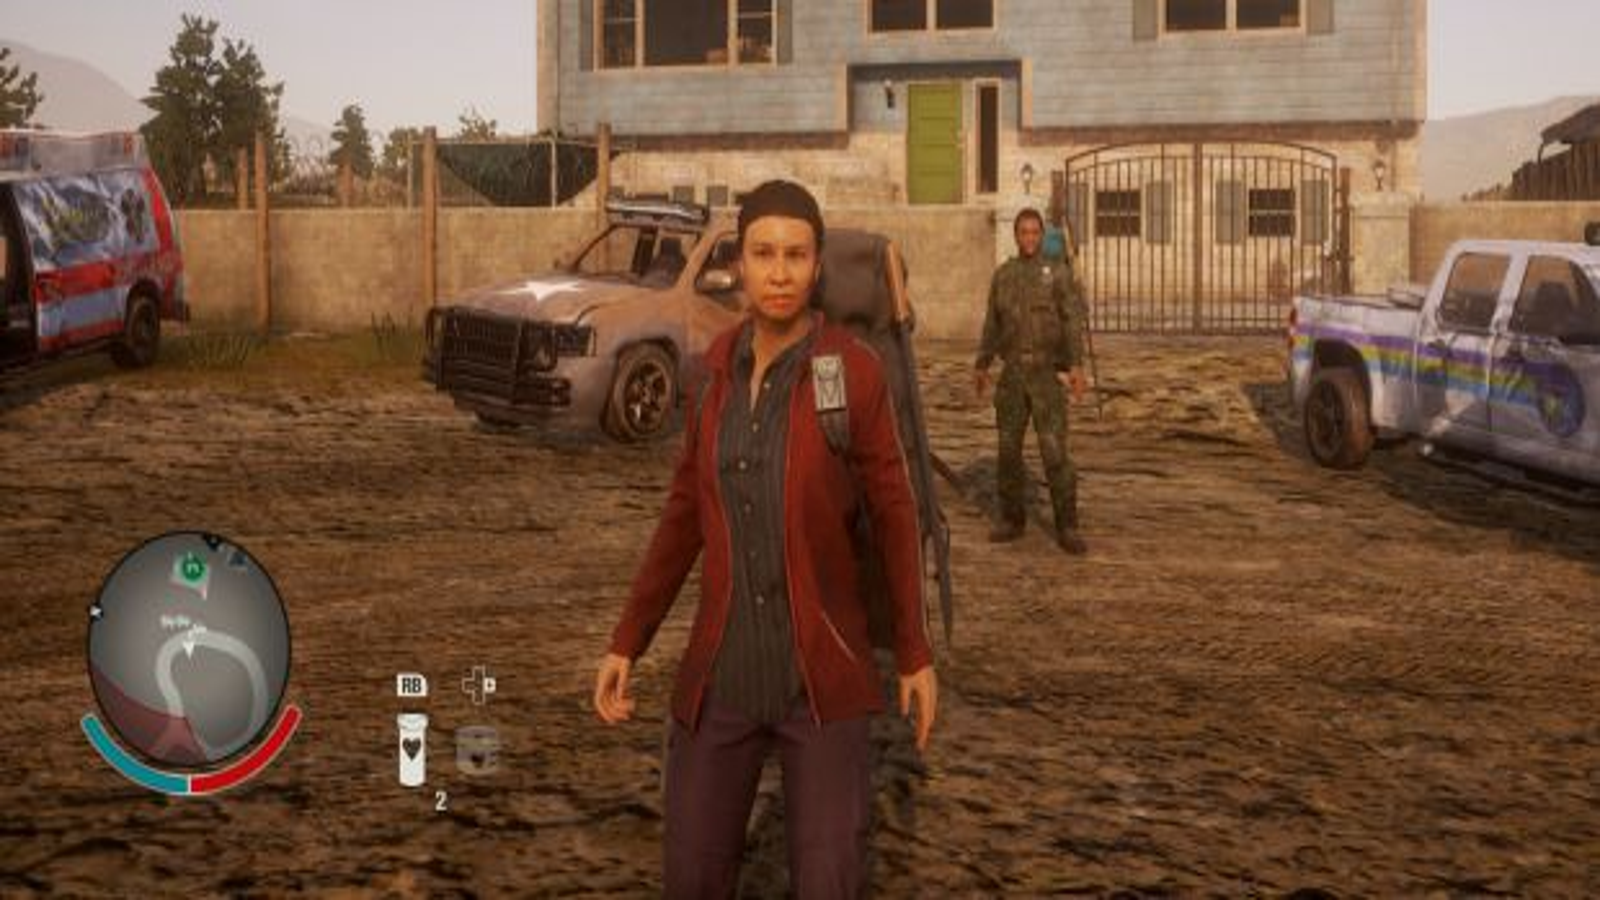 State of Decay 2 Reviews, Pros and Cons